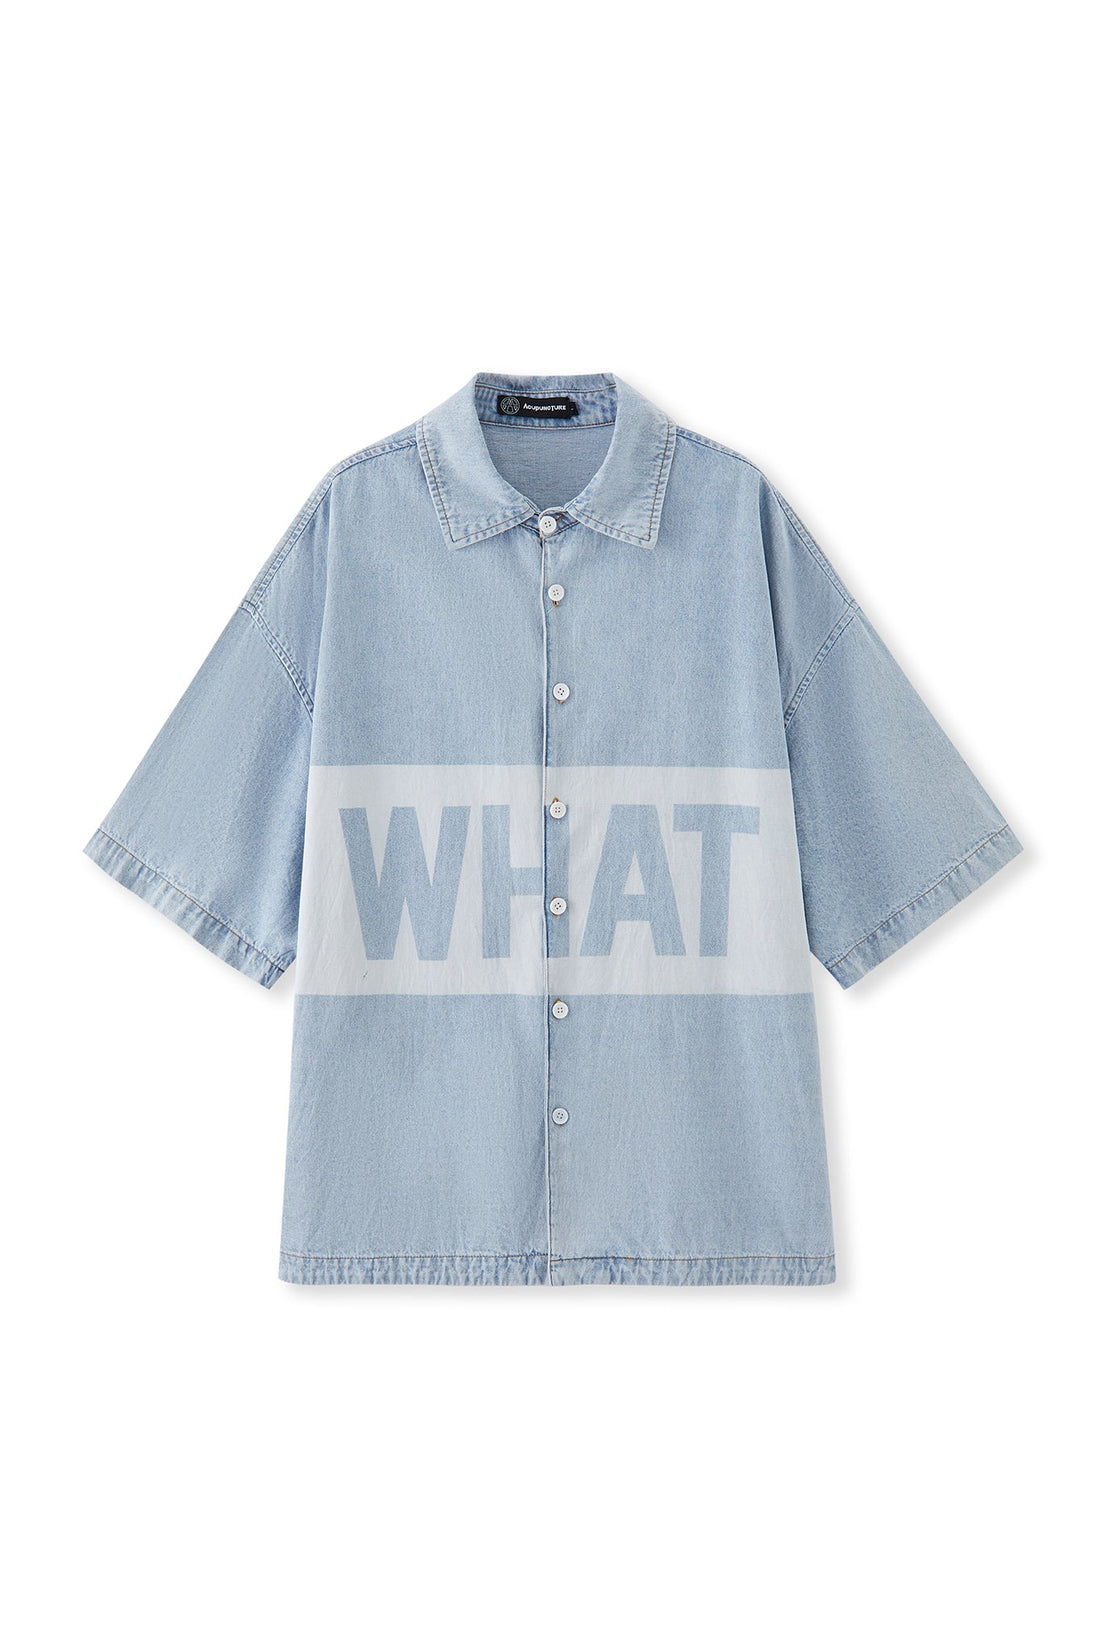 SAY WHAT SHIRT LIGHT BLUE Acupuncture